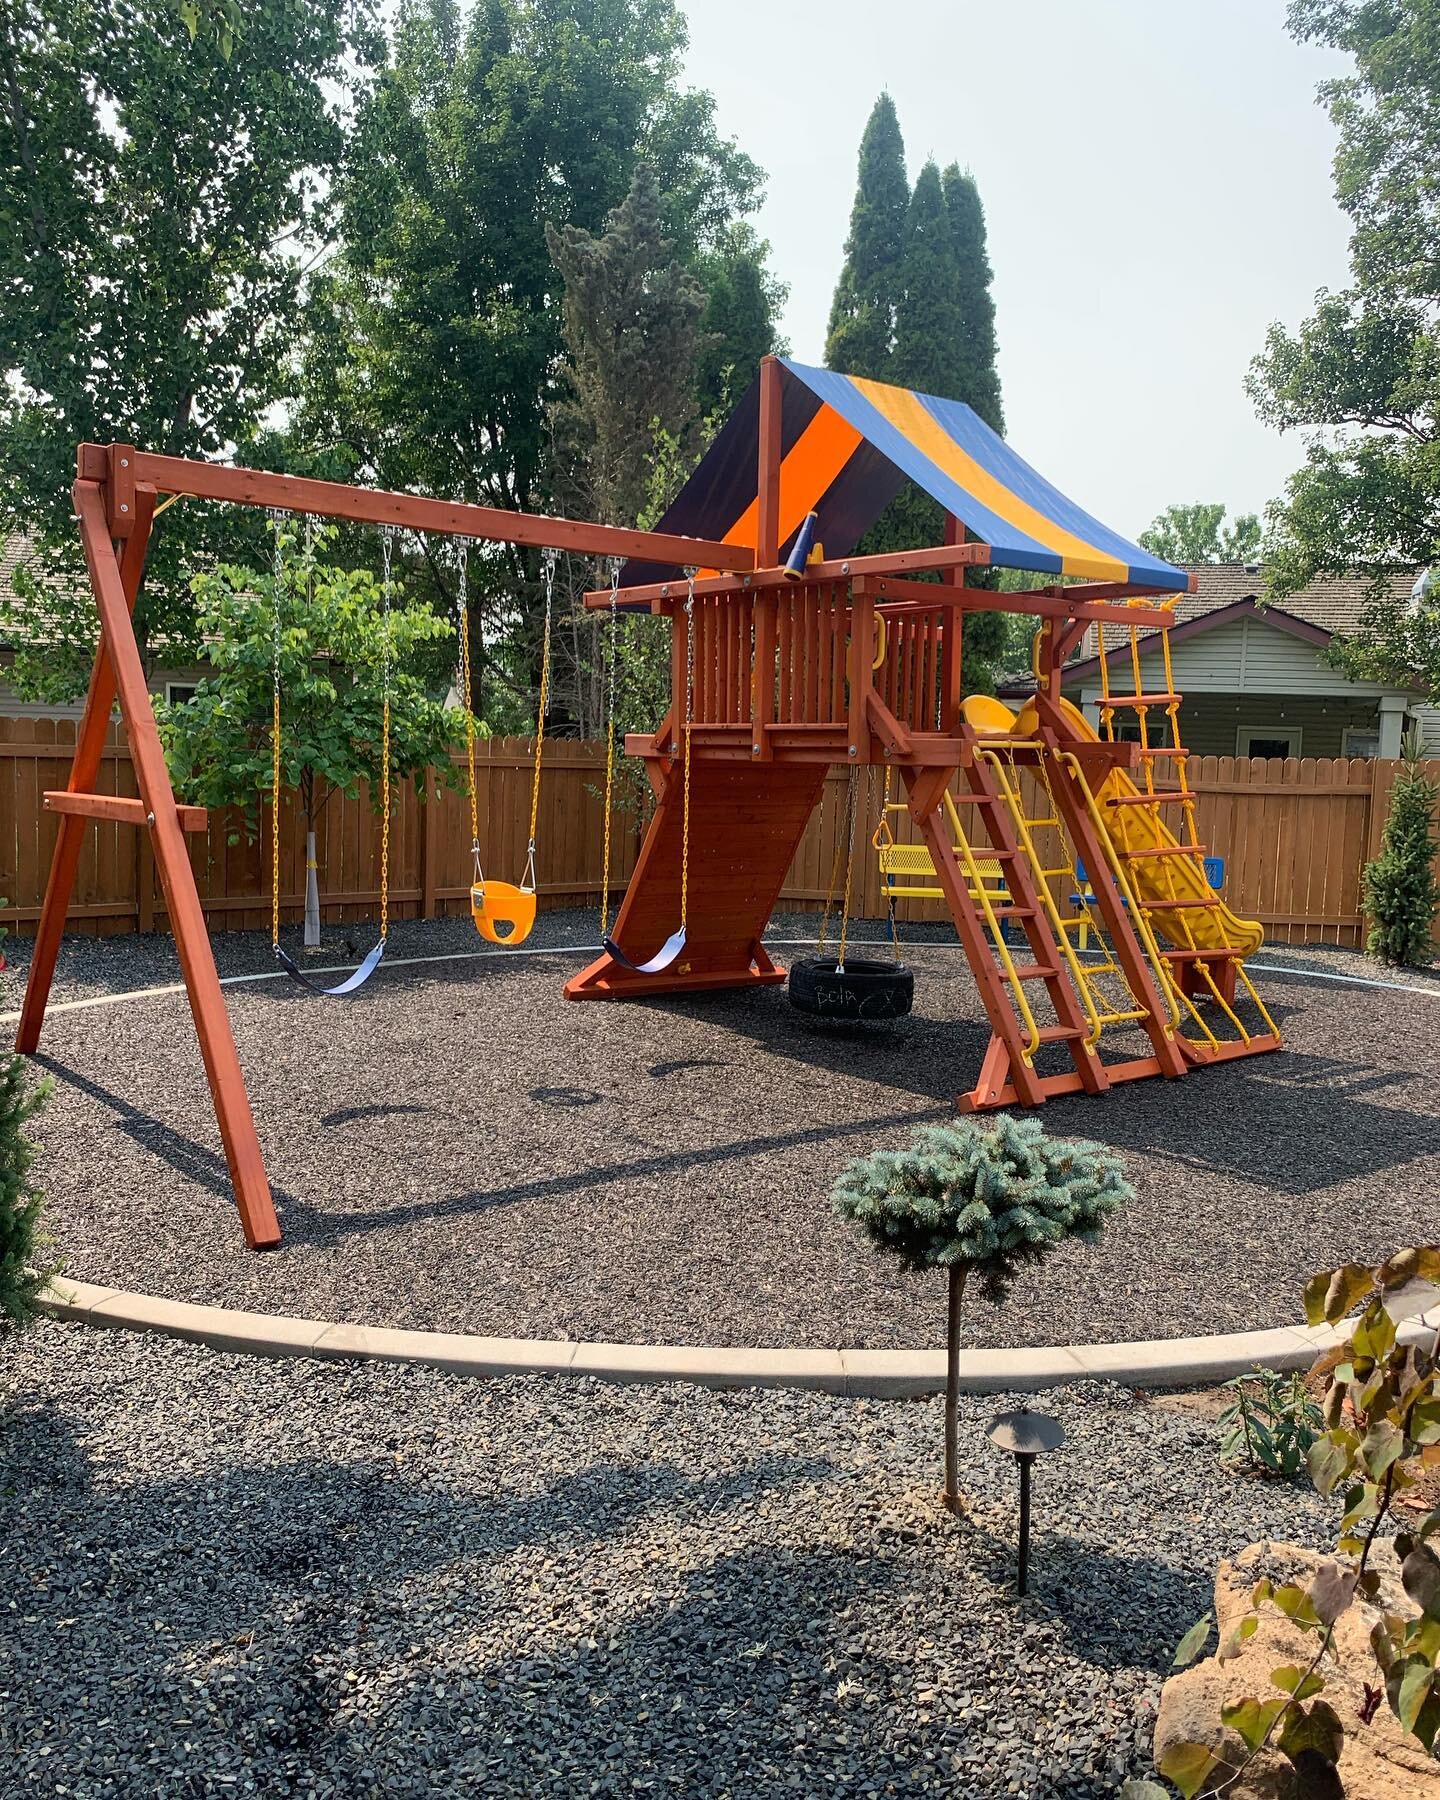 5.8 Jaguar Playcenter W/ Tarp
⠀
Complete with matching multi-color benches, this play area is ready for afternoons full of fun!
&mdash;&mdash;&mdash;&mdash;&mdash;&mdash;&mdash;&mdash;&mdash;&mdash;&mdash;&mdash;&mdash;
#intermountainplayground #swin